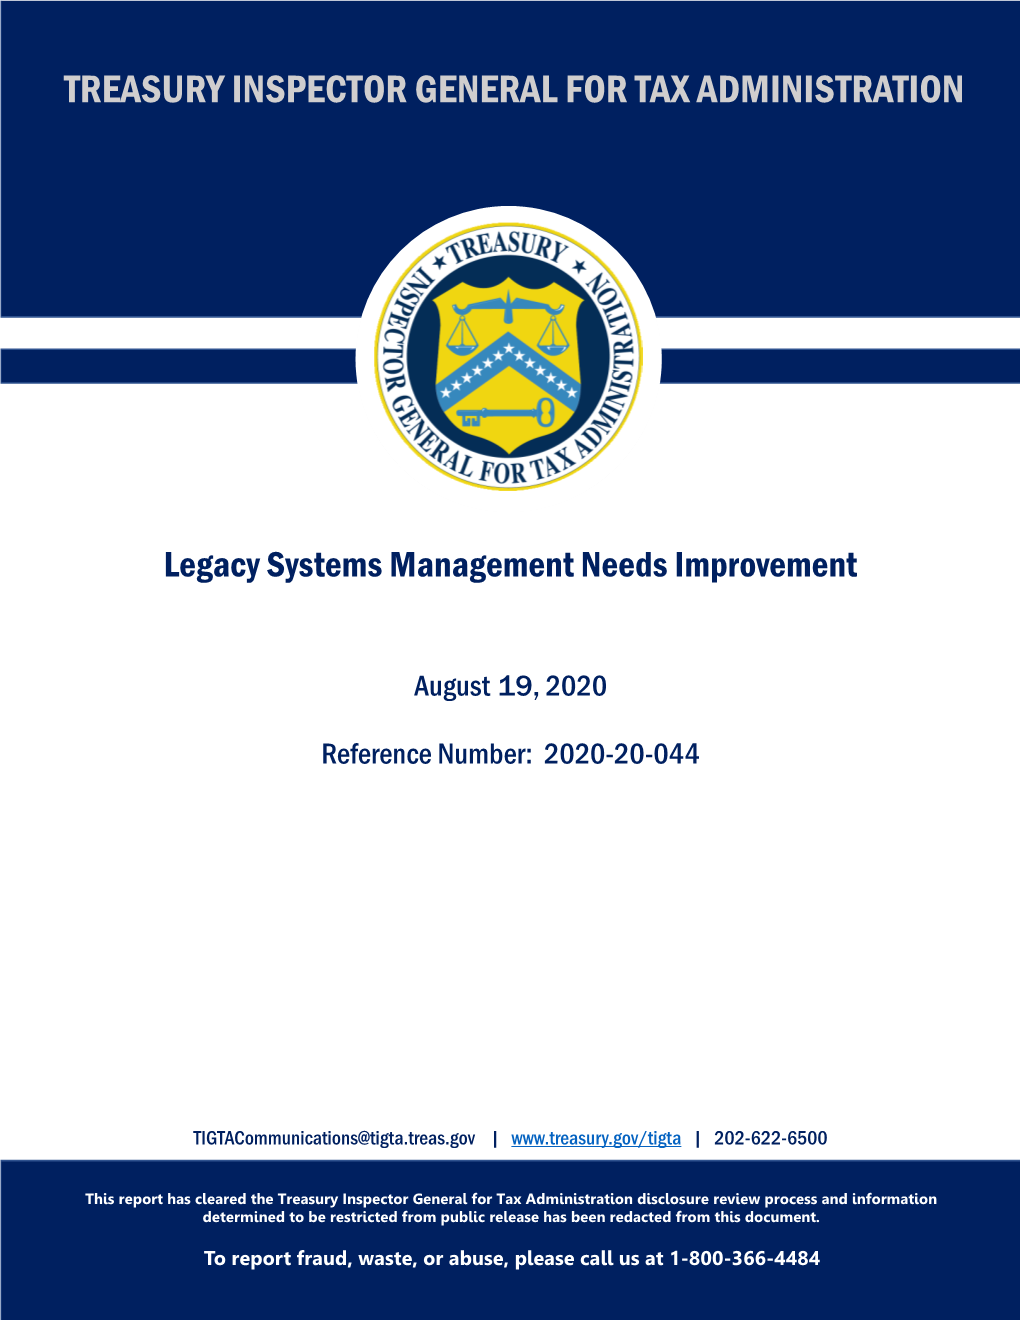 Legacy Systems Management Needs Improvement